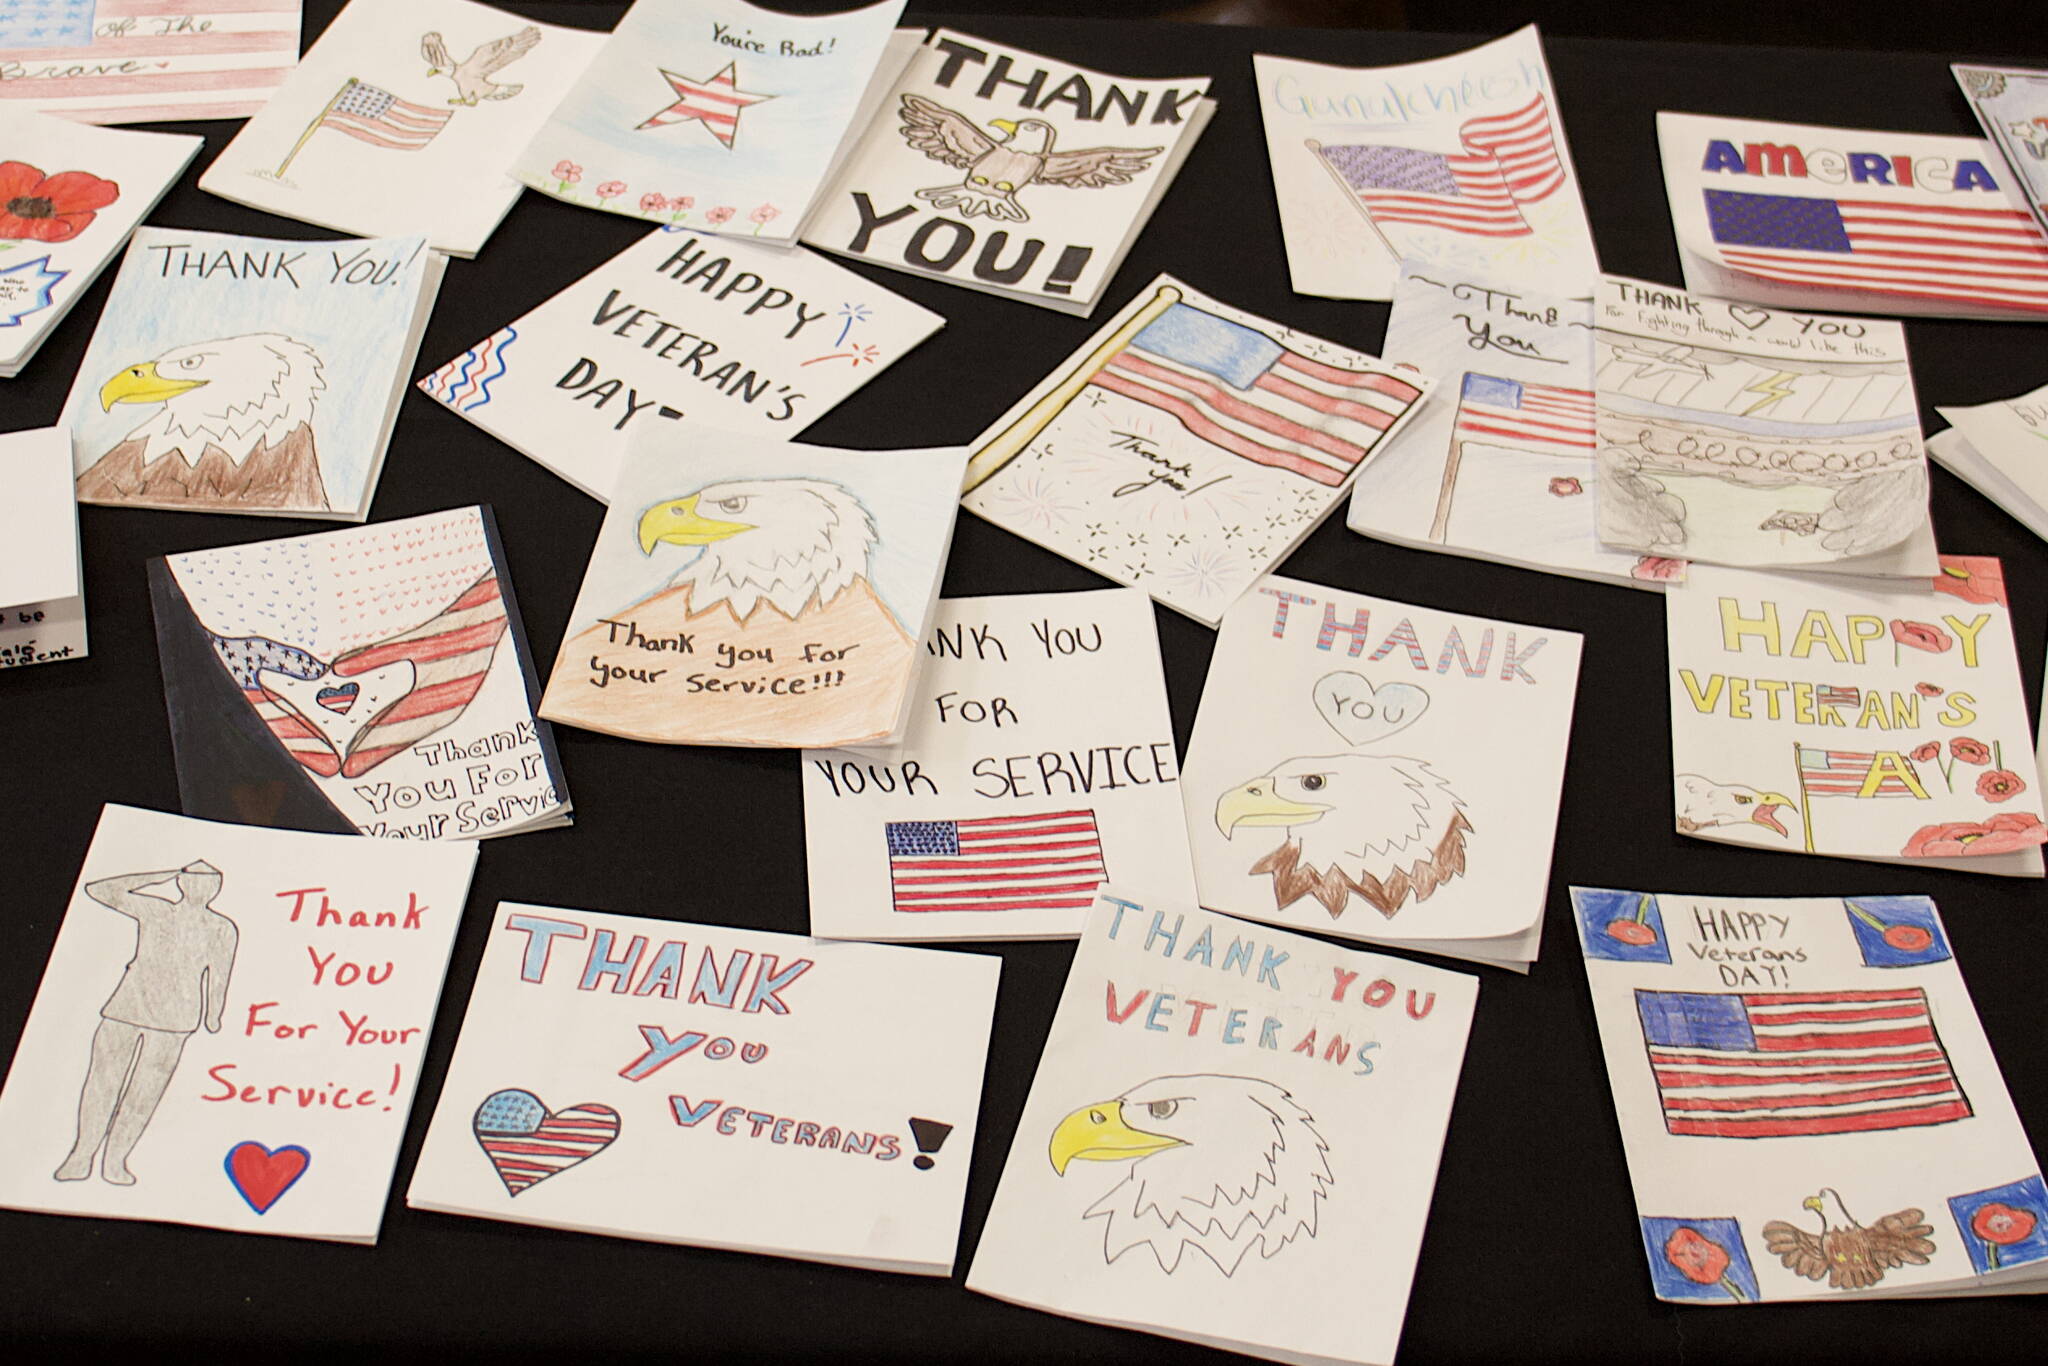 Thank you cards by local youths are displayed on a table at an entrance to Elizabeth Peratrovich Hall during a Veterans Day celebration on Saturday hosted by Southeast Alaska Native Veterans. (Mark Sabbatini / Juneau Empire)